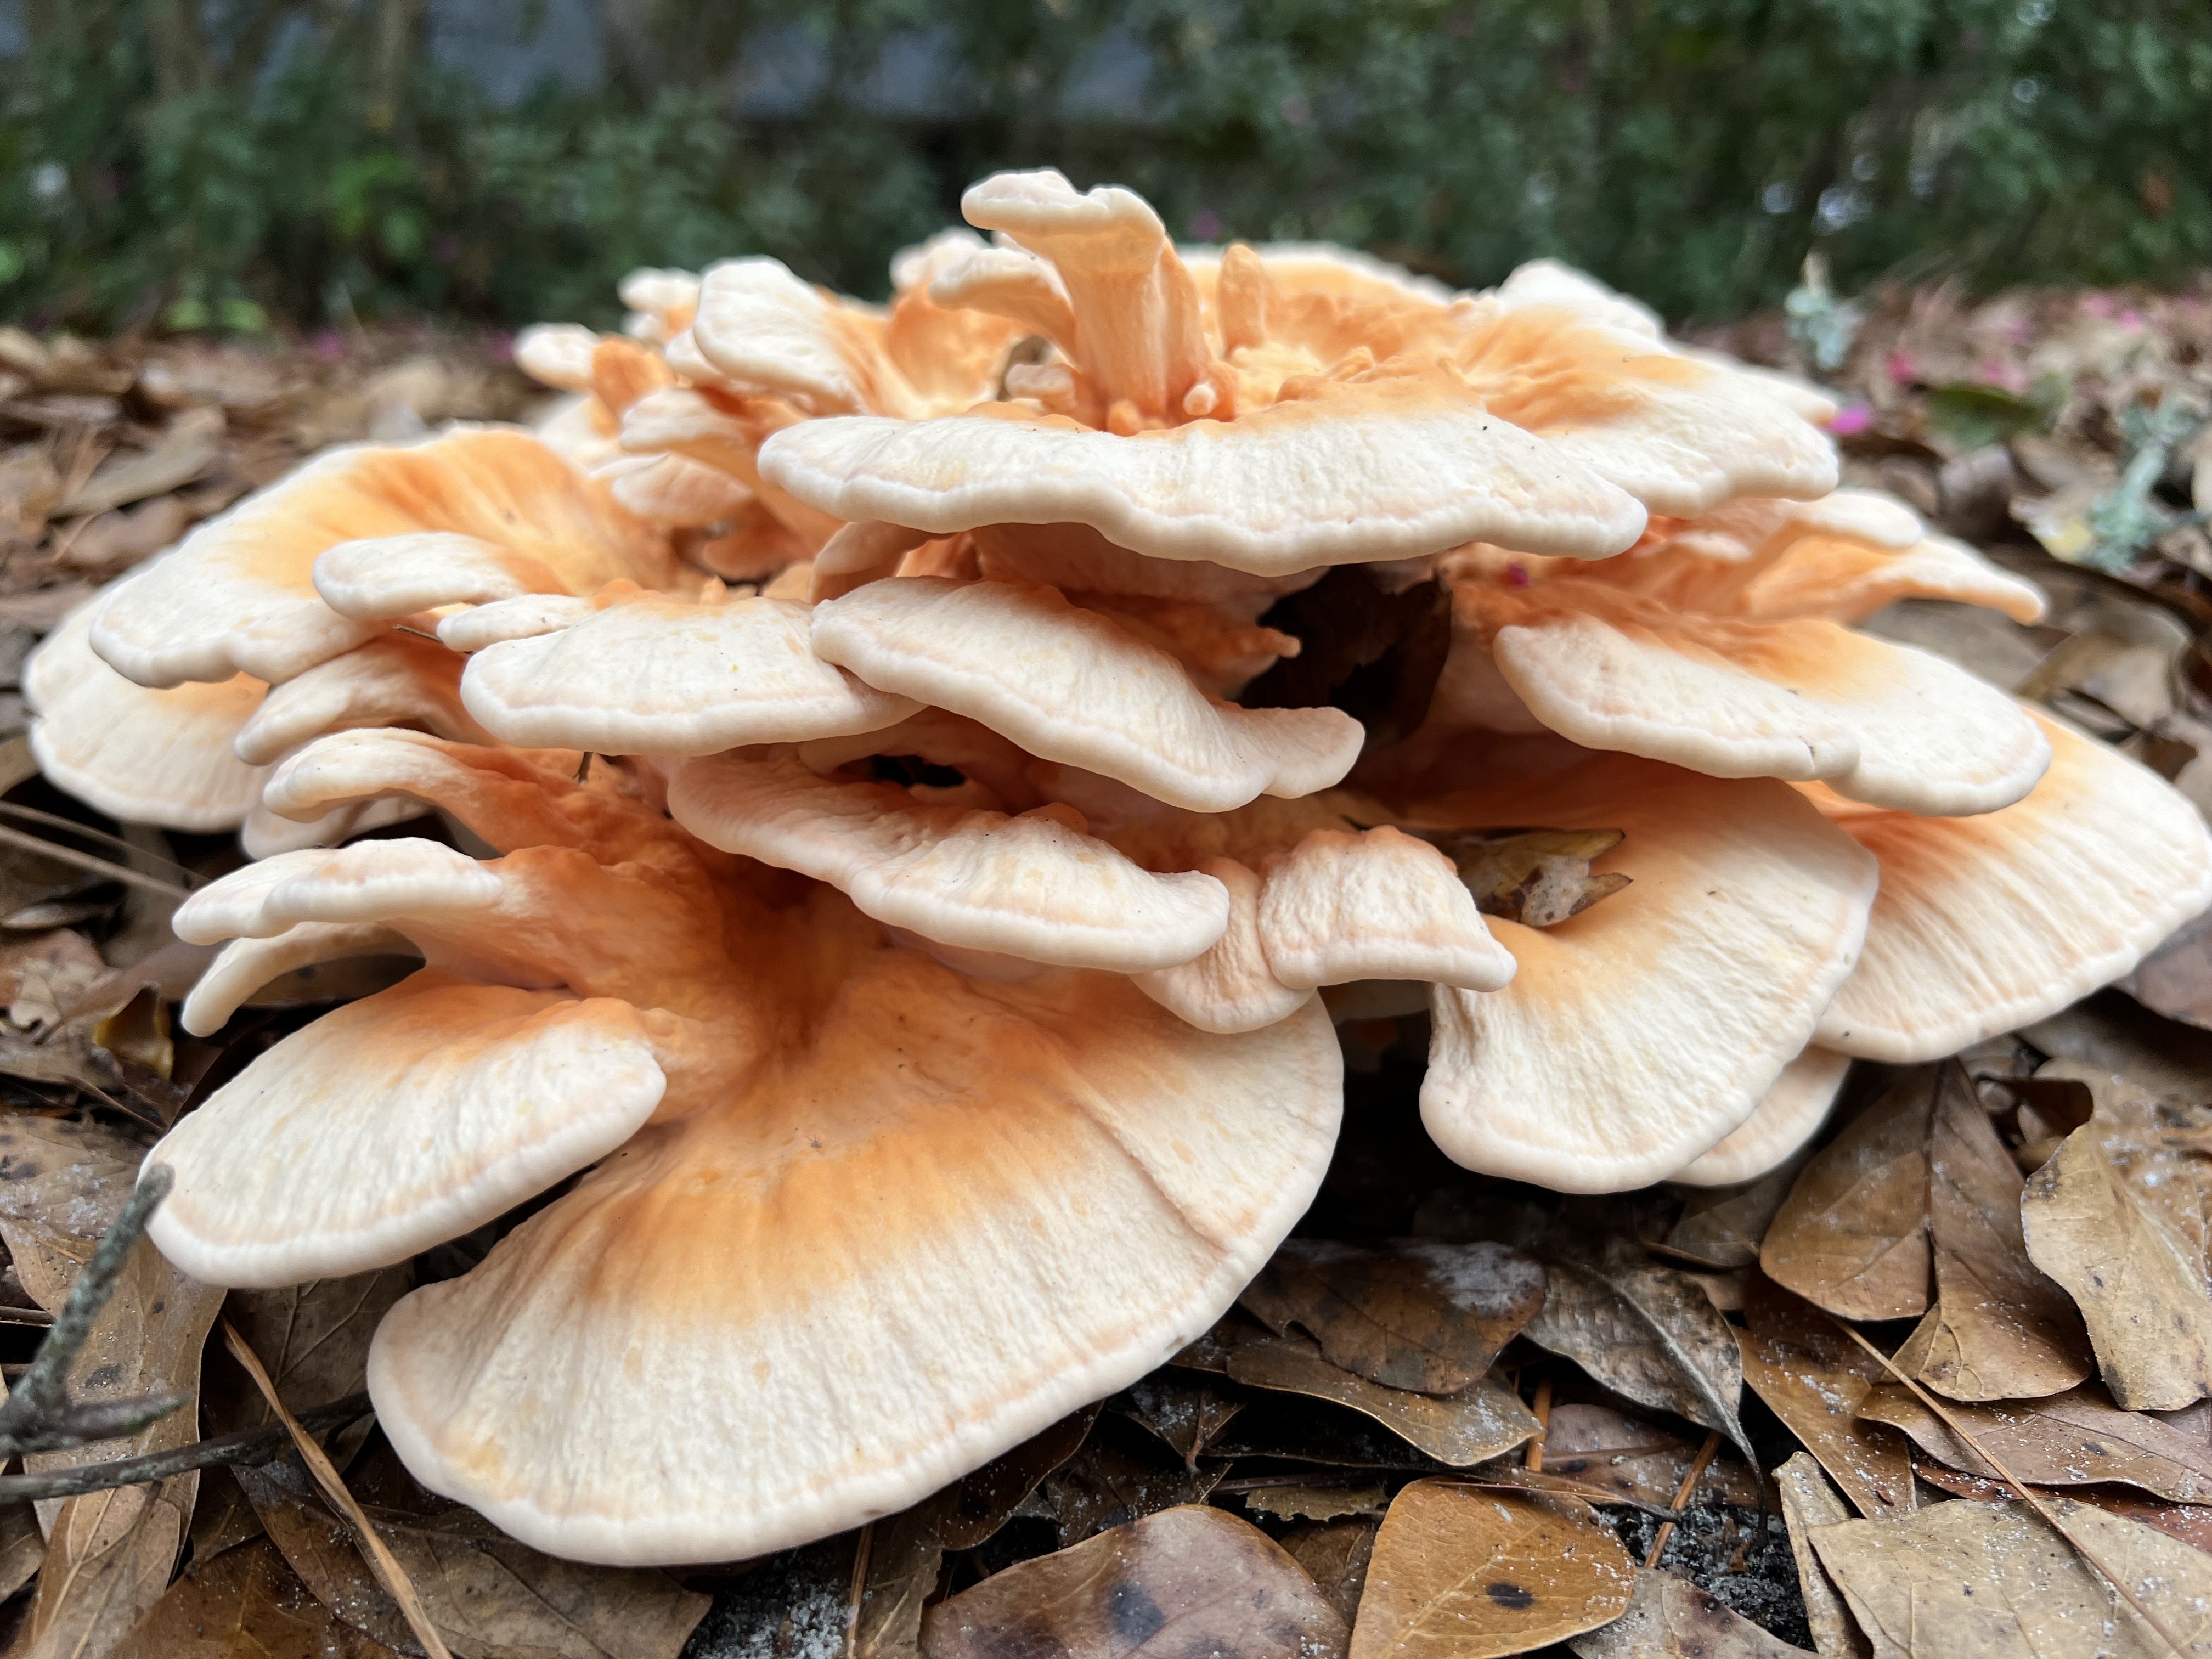 Side view of mushrooms. They have colors that go from orange in the center to creamy white near the edges. 